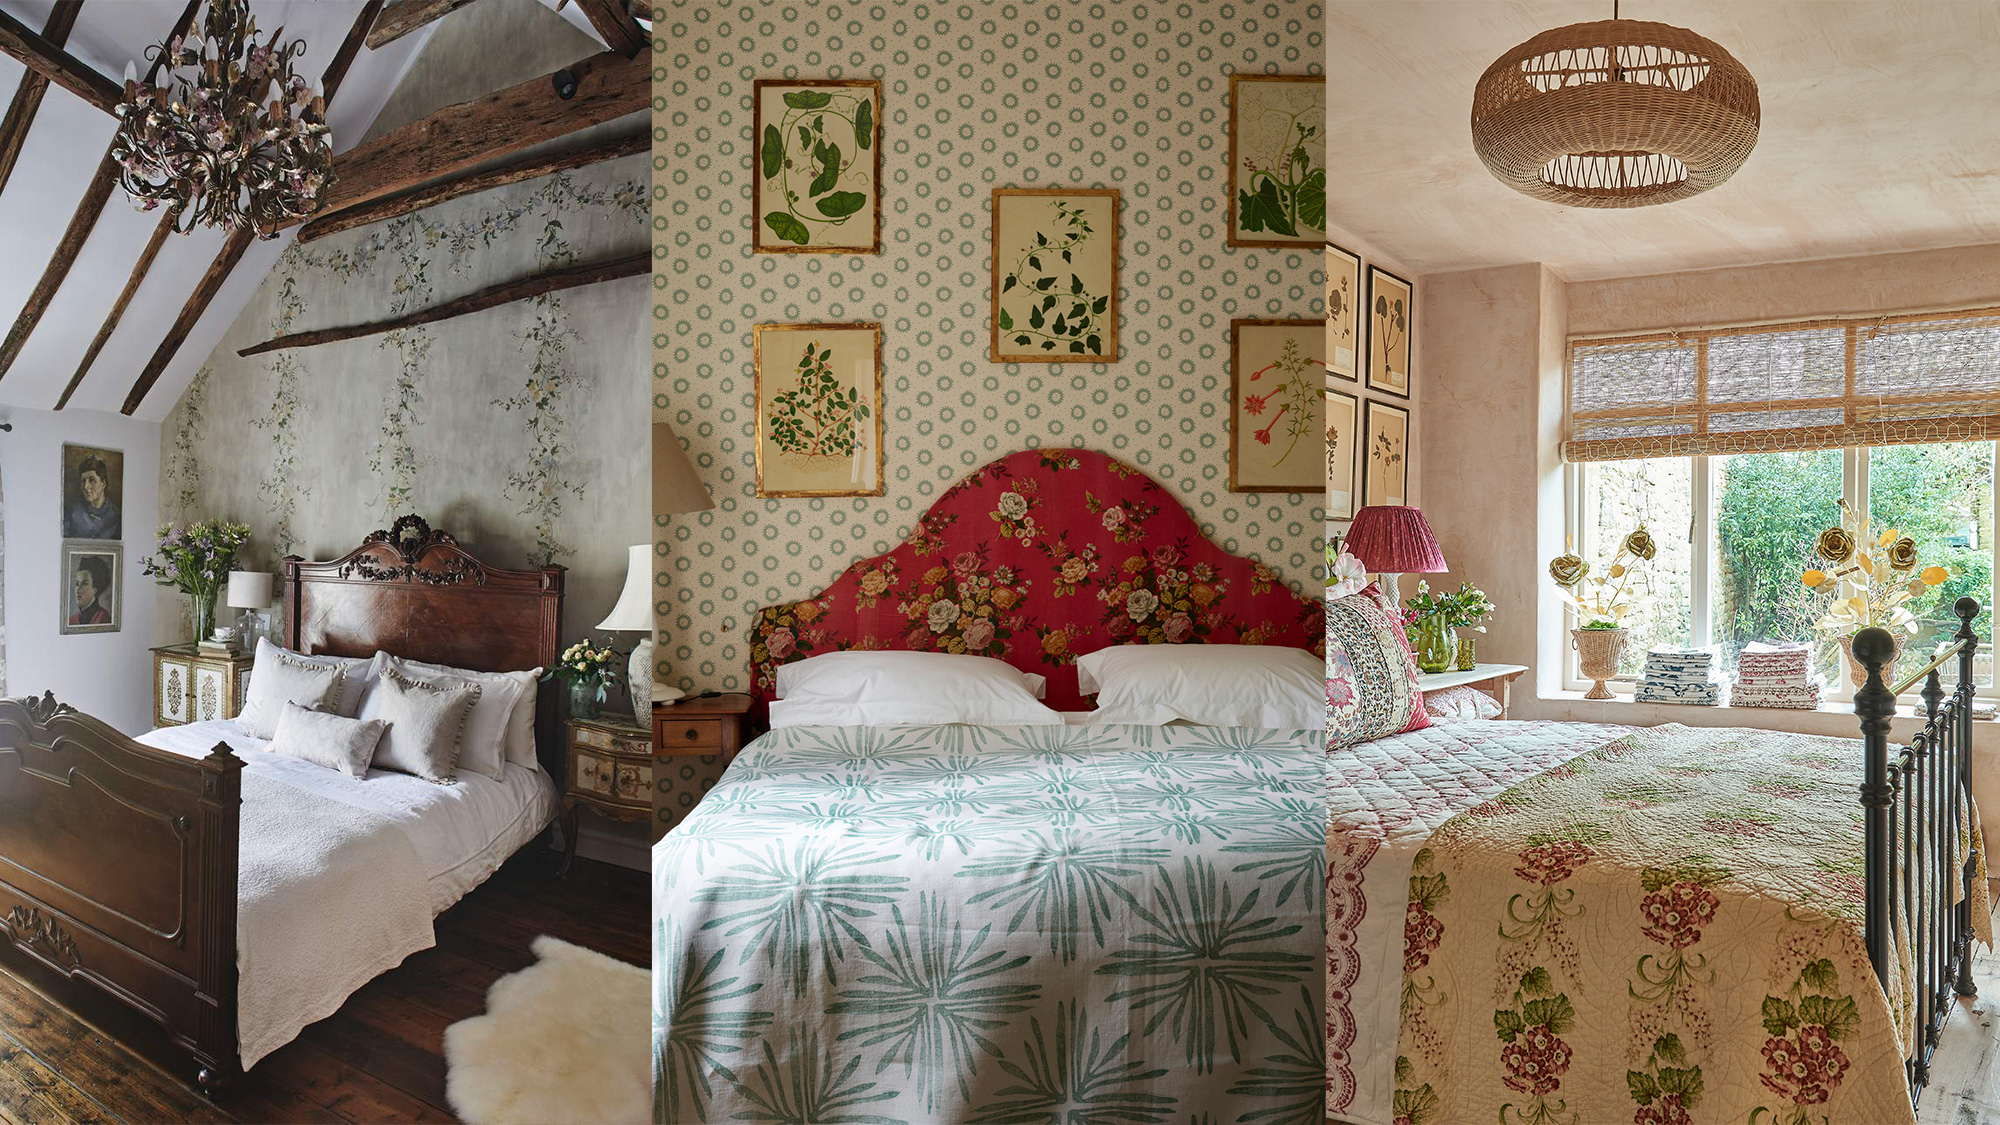 Vintage bedroom ideas: 11 characterful schemes to inspire |